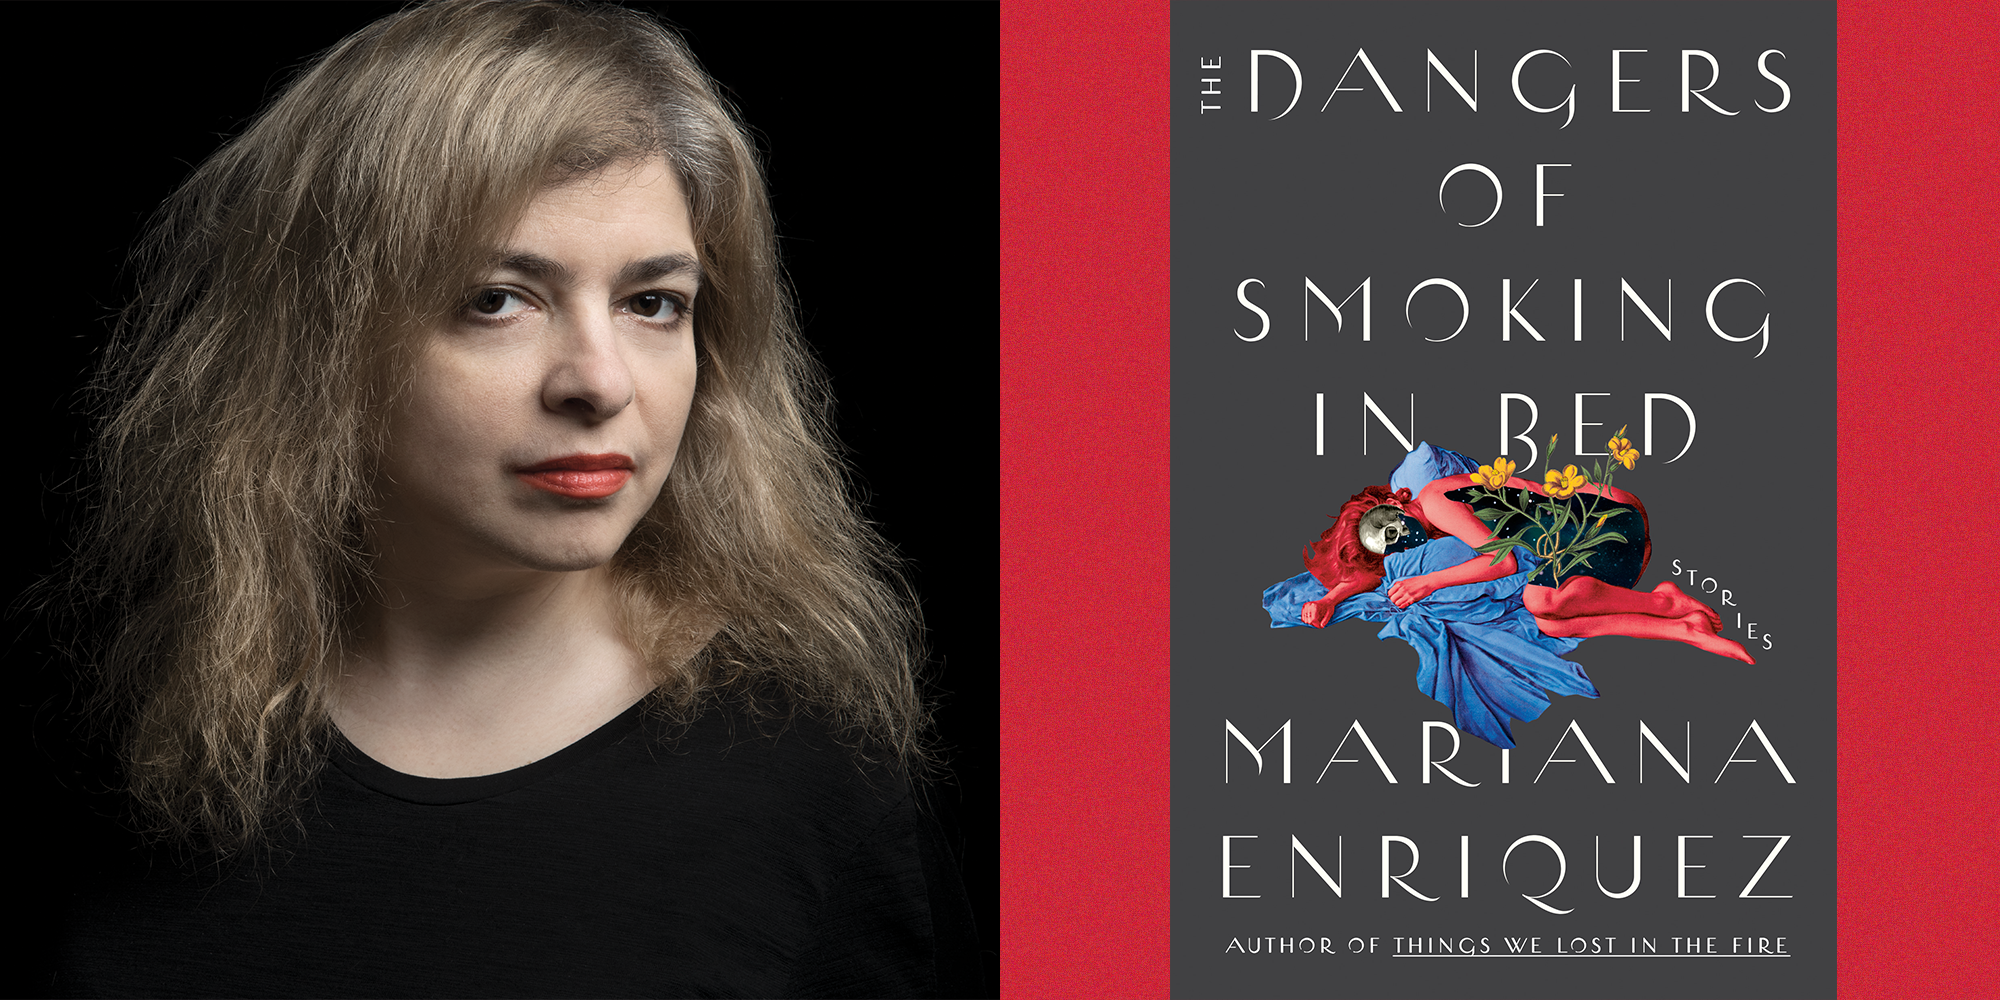 The Dangers of Smoking in Bed by Marina Enríquez is Thrilling: Review